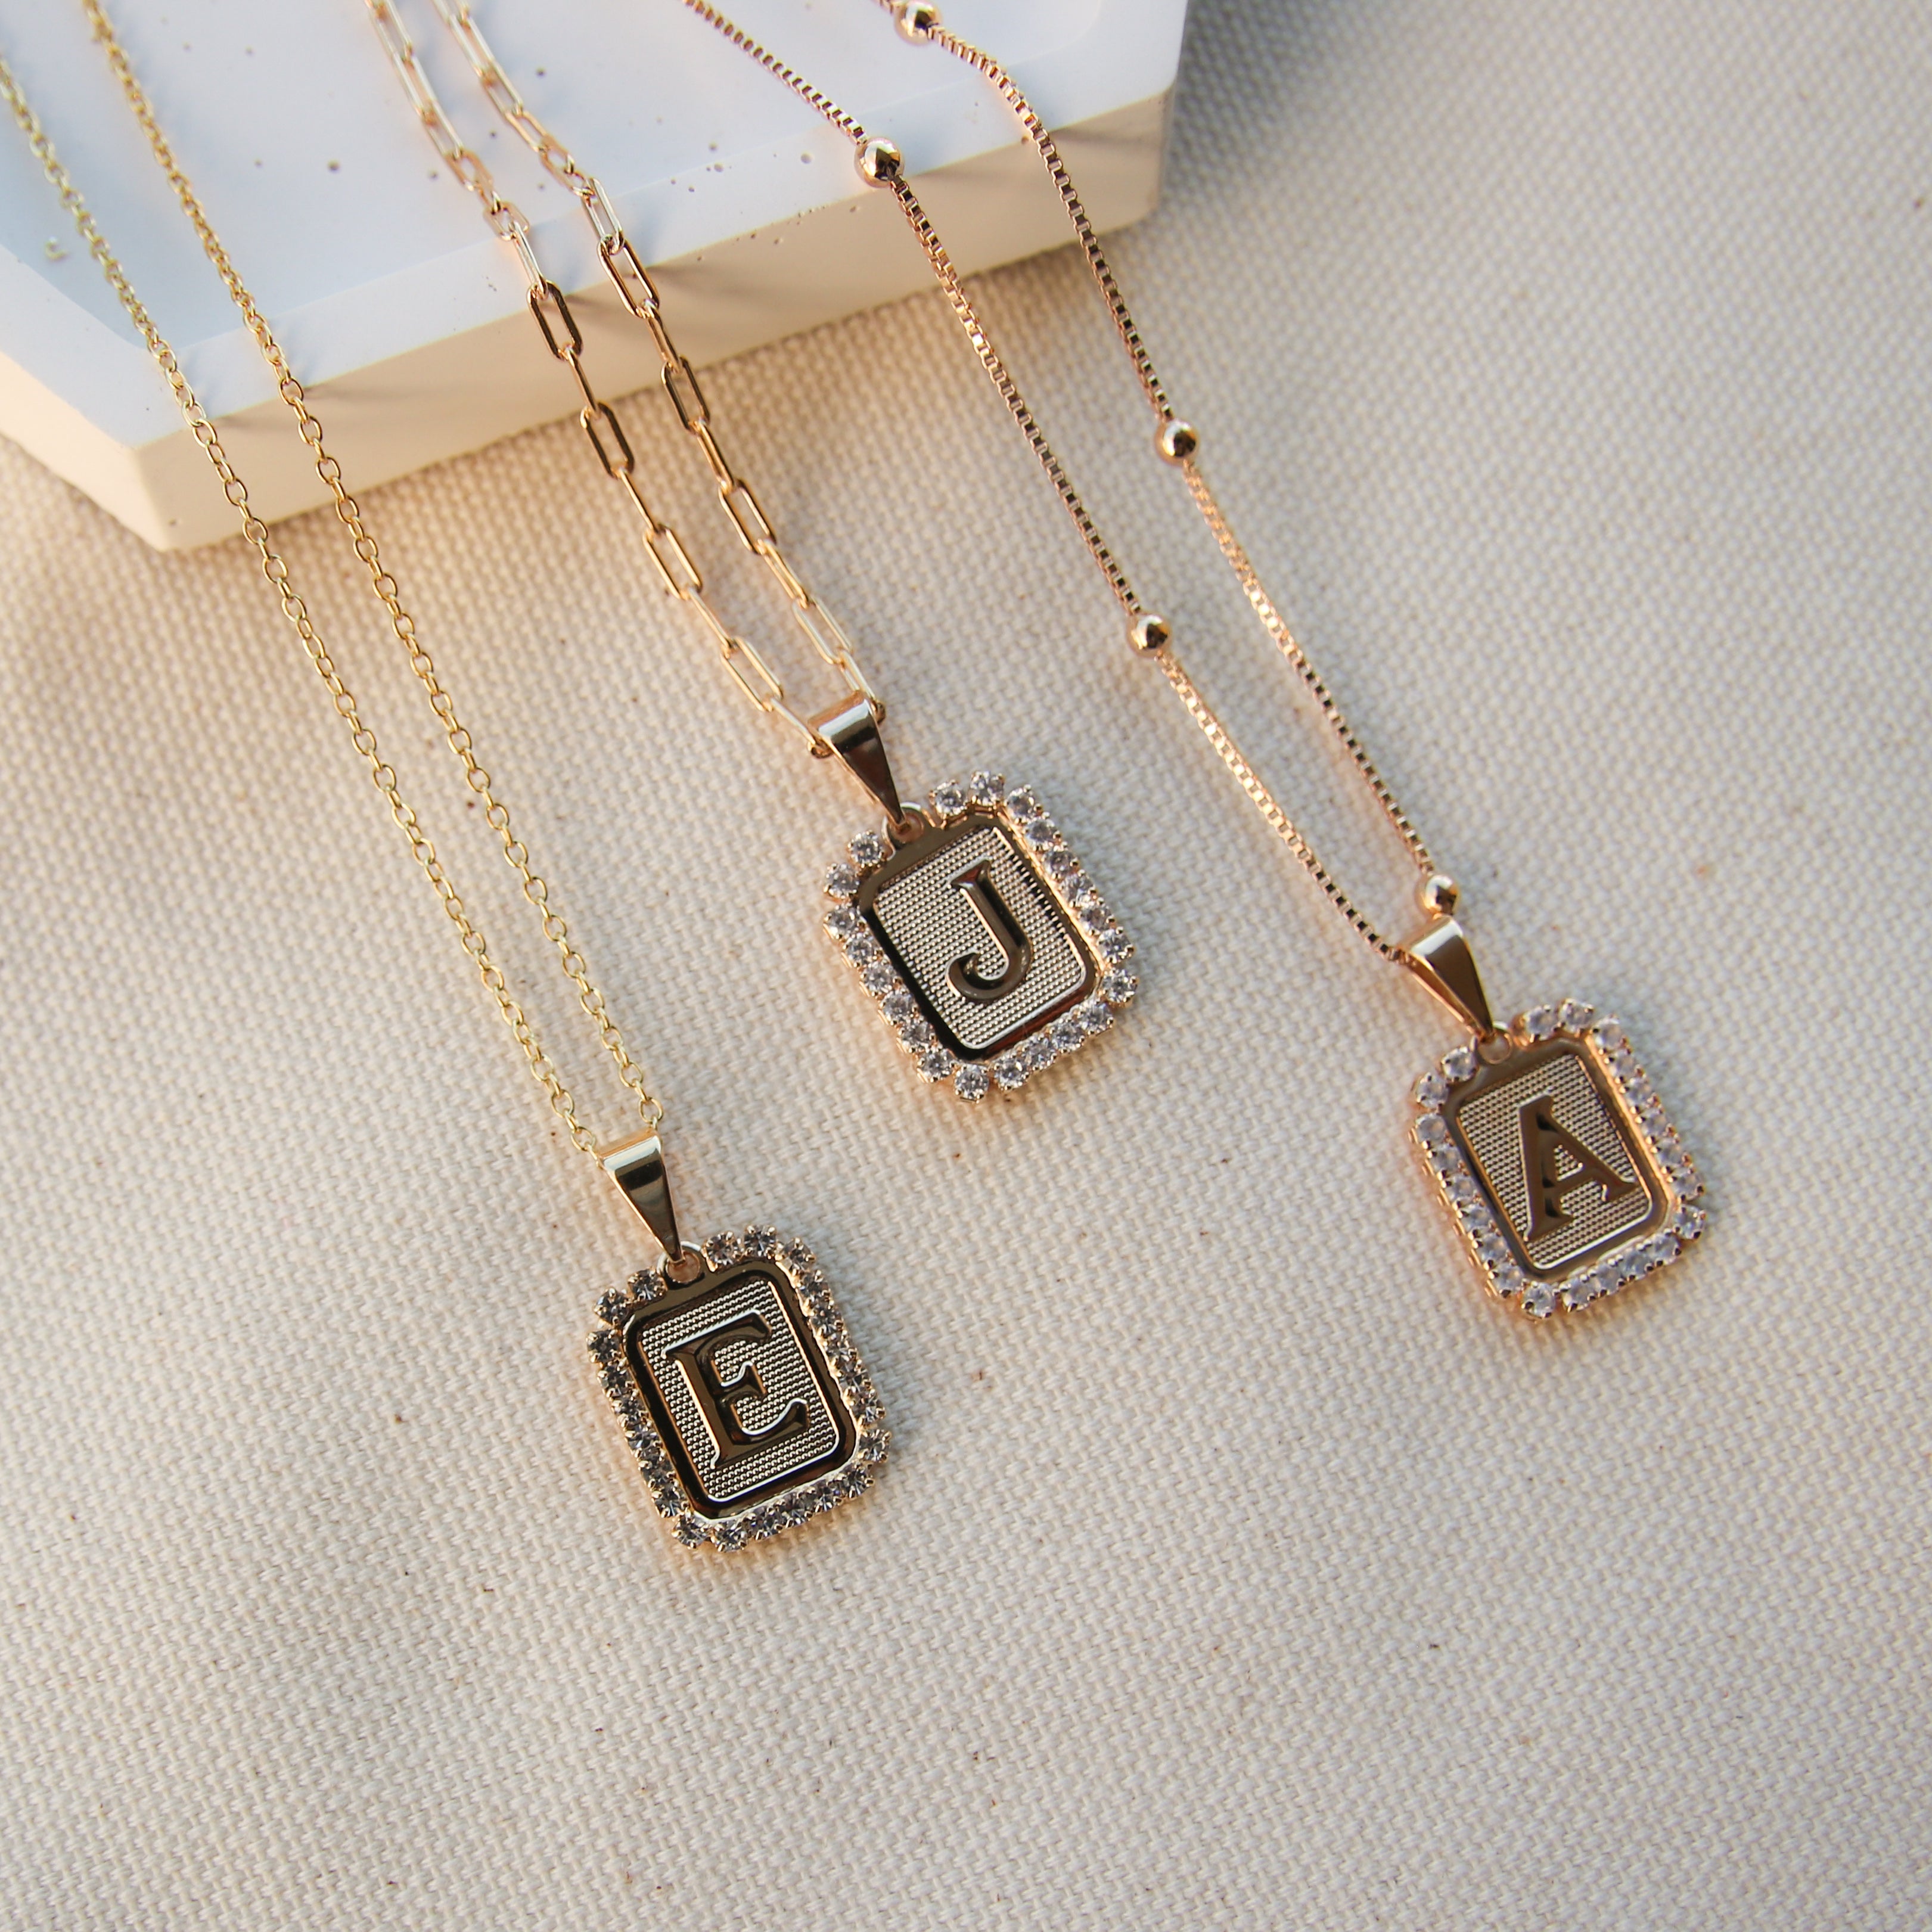 Up to 4 Initials Disc Necklace 1/2